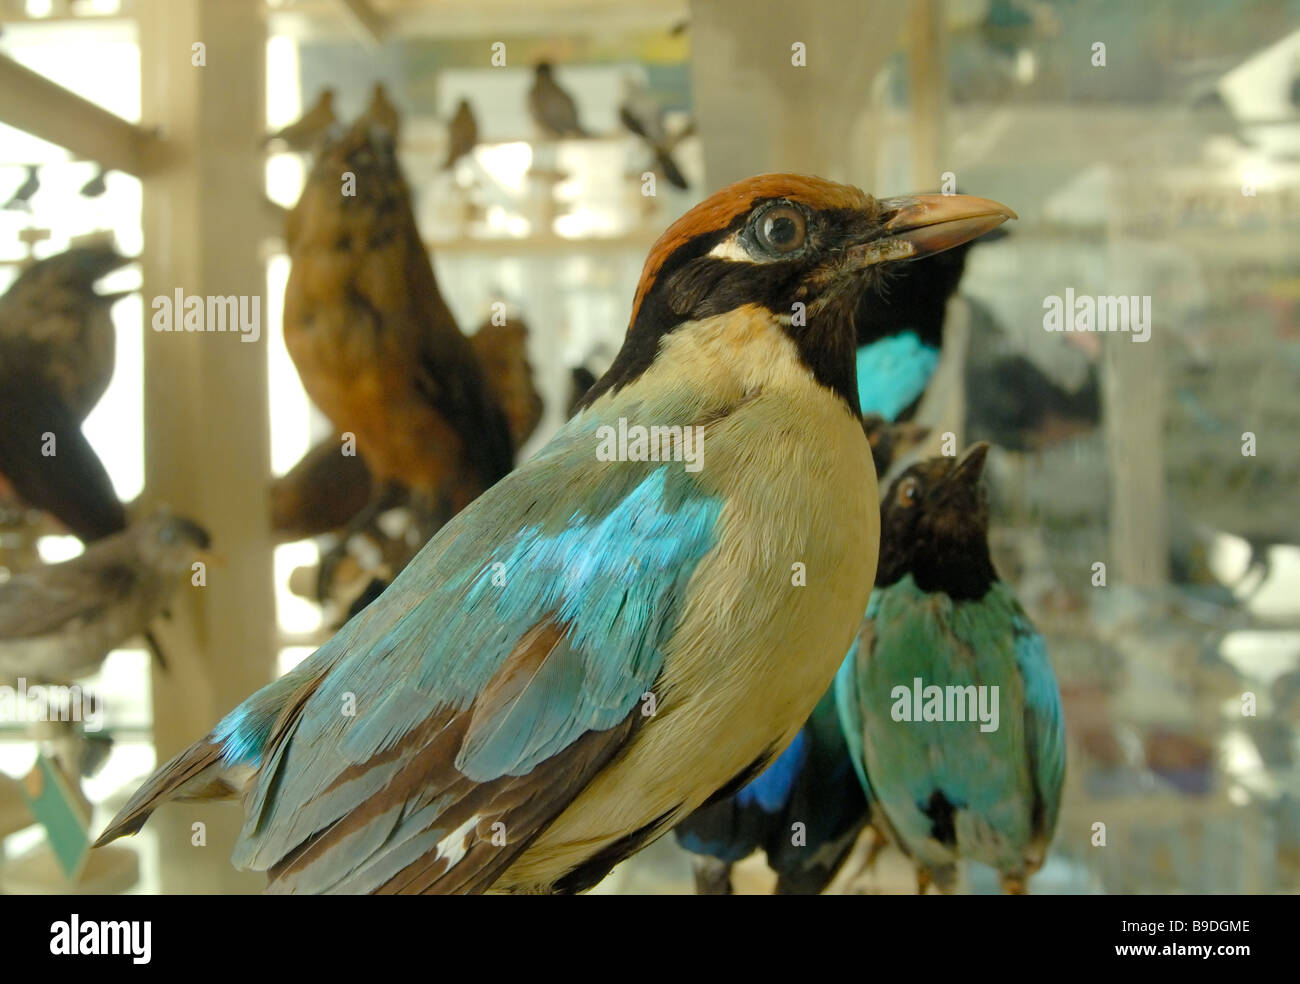 A display of birds in the Natural History Museum in Lille, France Stock Photo